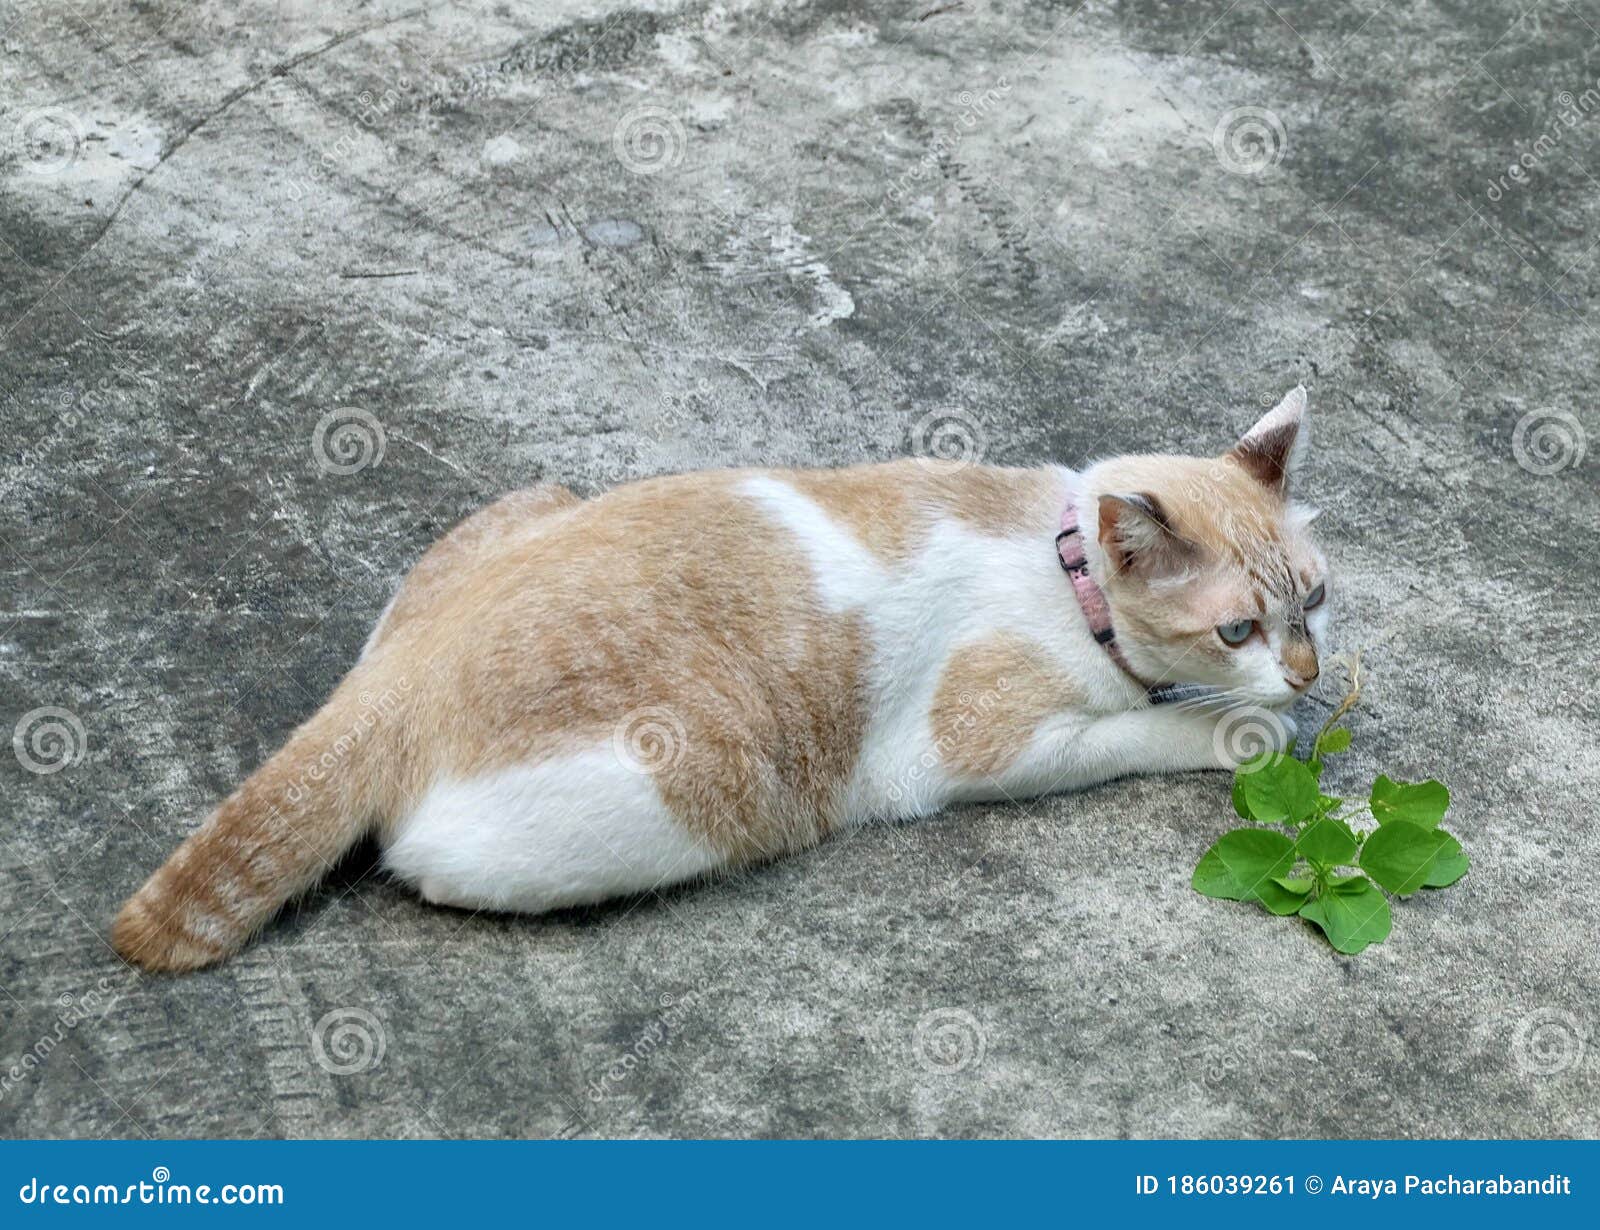 Cat Eating The Root Of Indian Nettle Plant Stock Image Image of